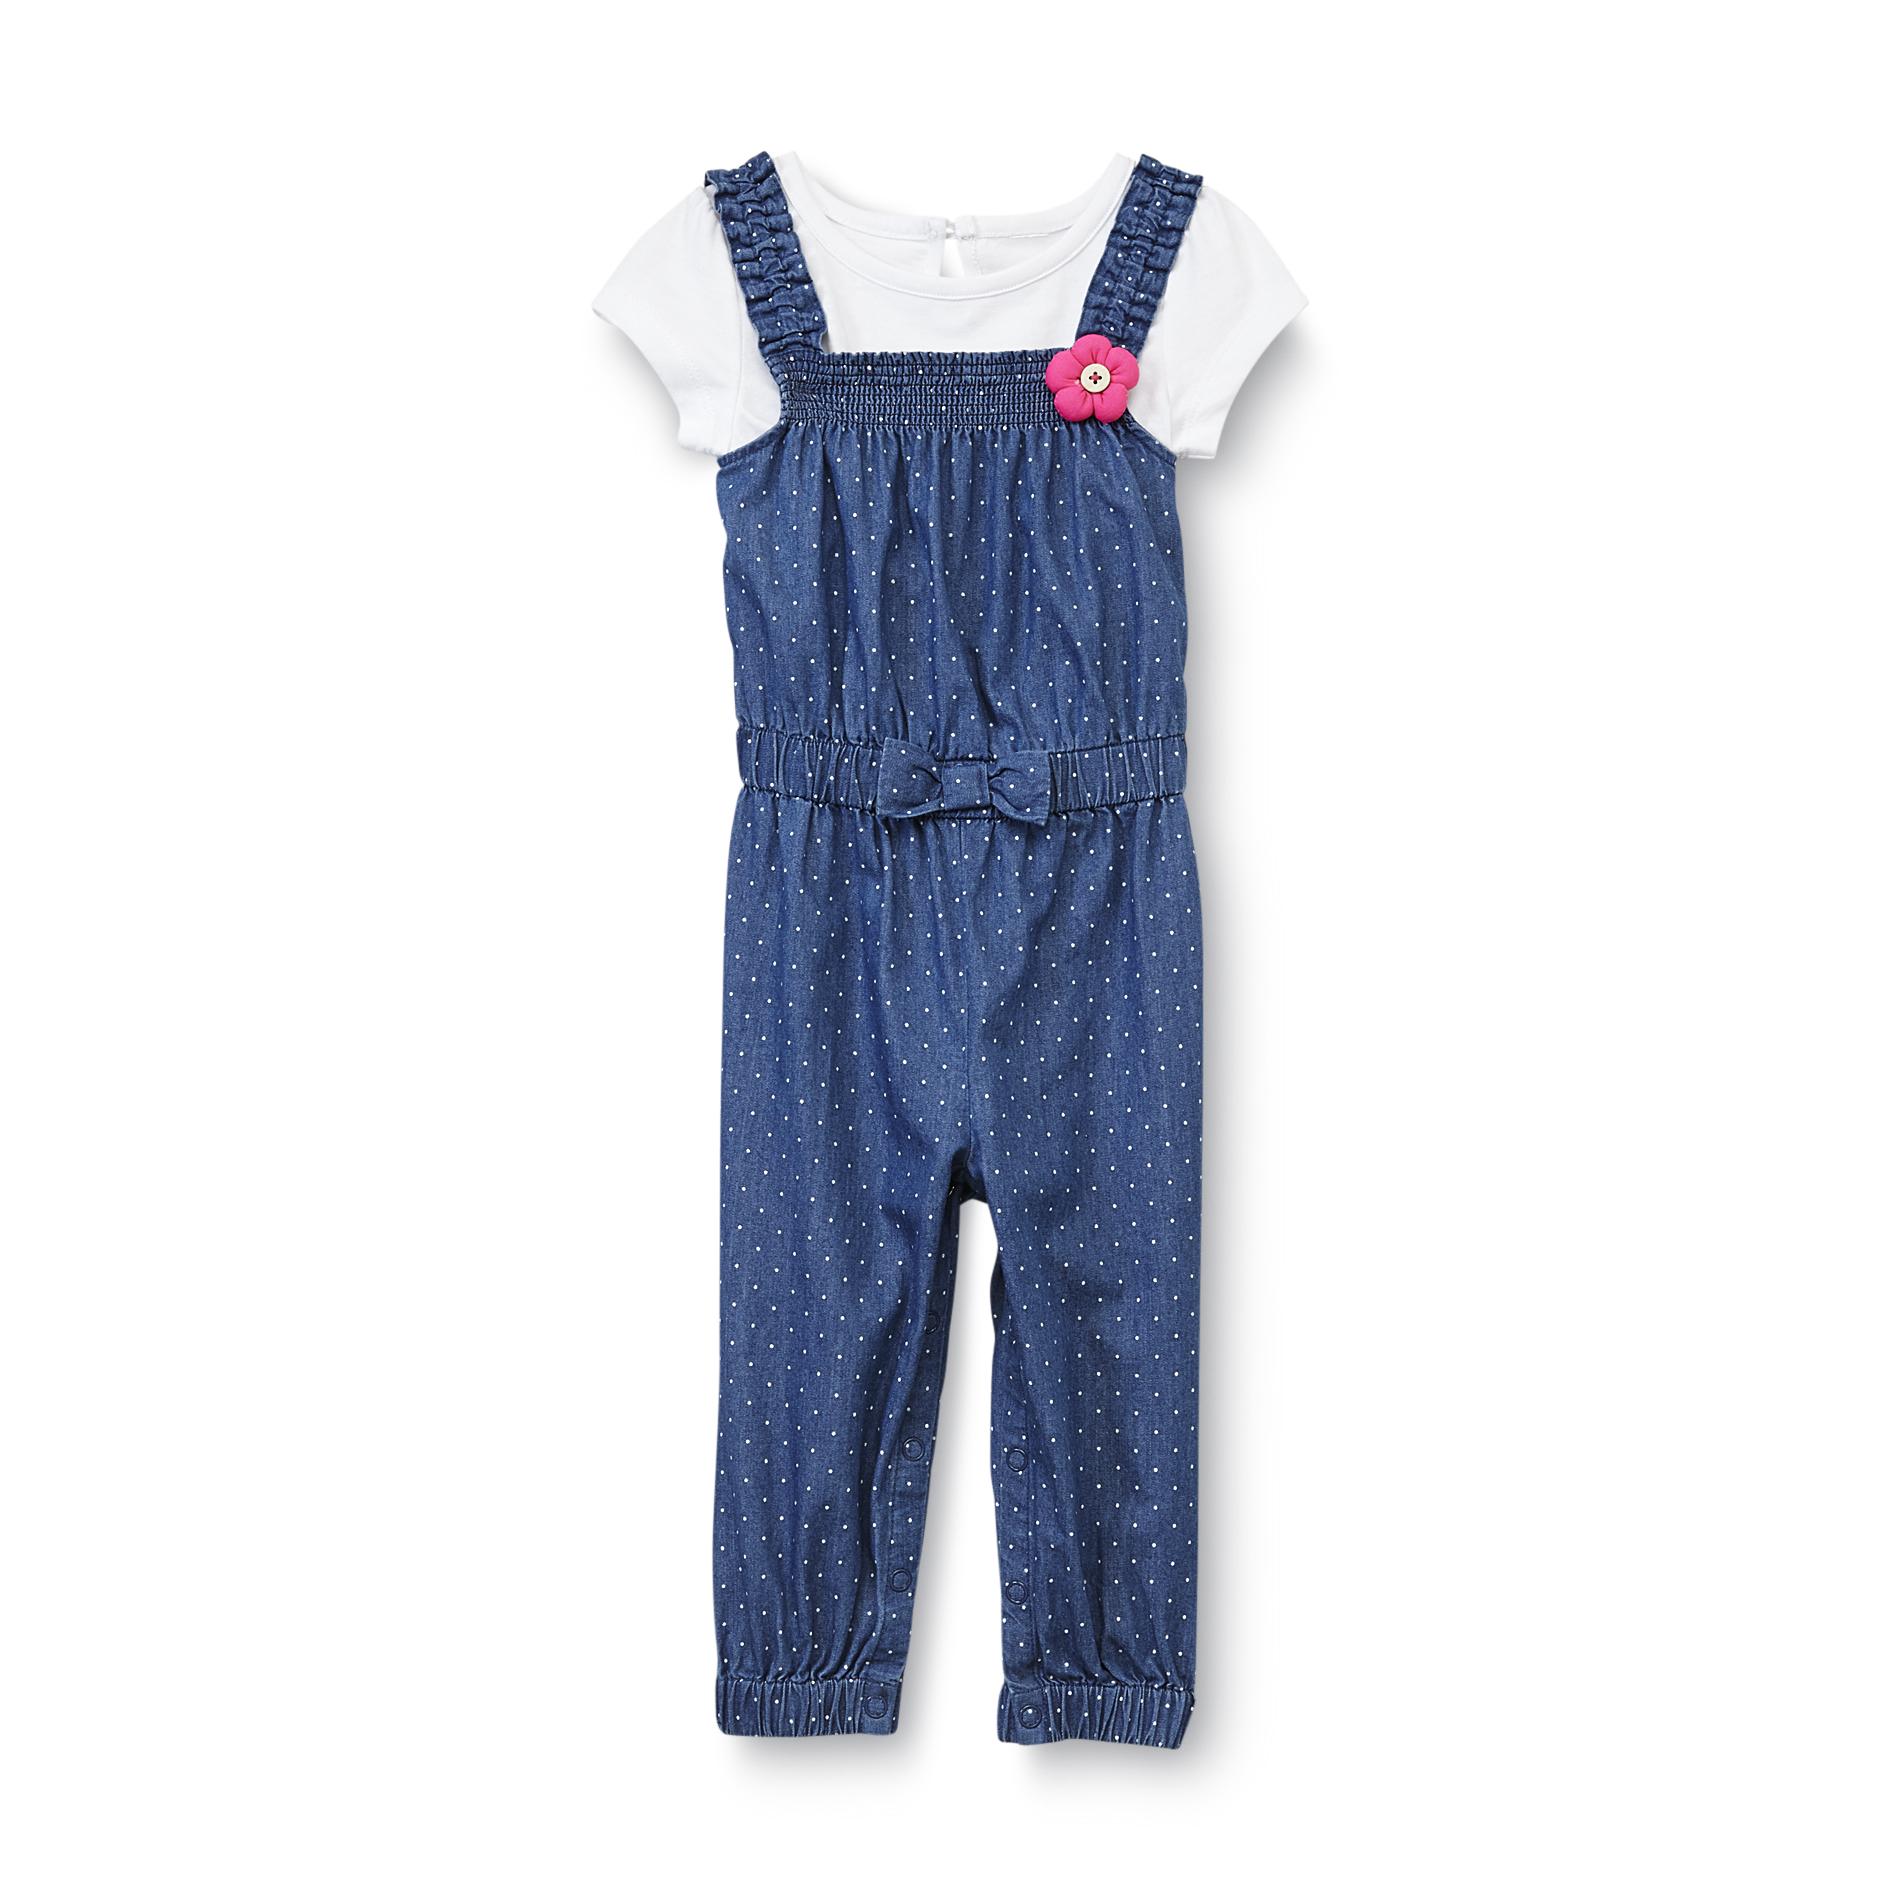 Route 66 Infant & Toddler Girl's Bodysuit & Top - Dotted